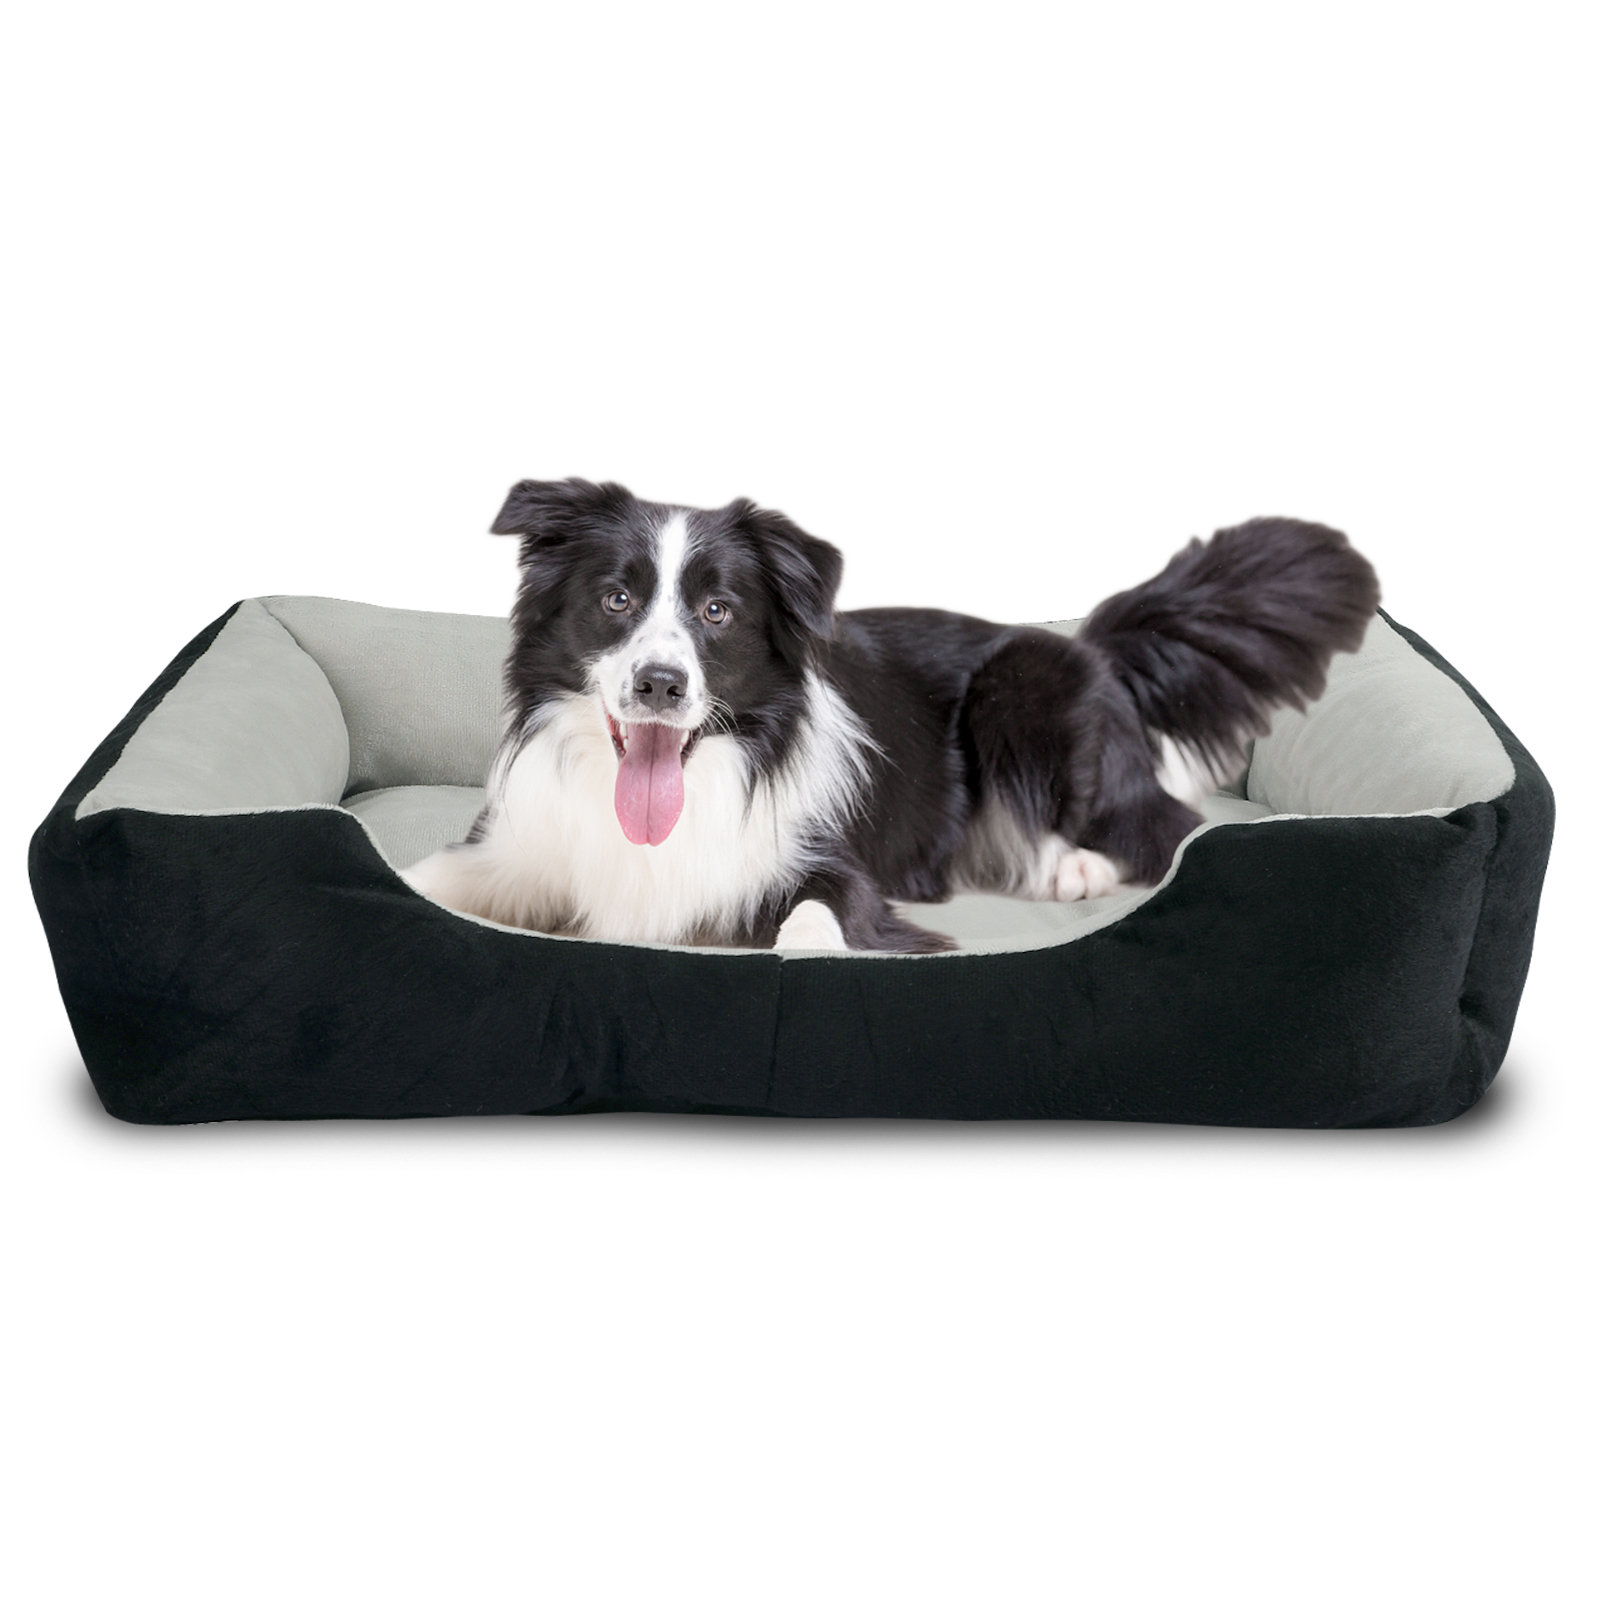 Dog Bed - Orthopedic Pet Calming Bed Soft Warm Cat Dog Nest House Small Large Washable Mat Tucker Murphy Pet Size: Extra Large (35.43 W x 27.56 D x